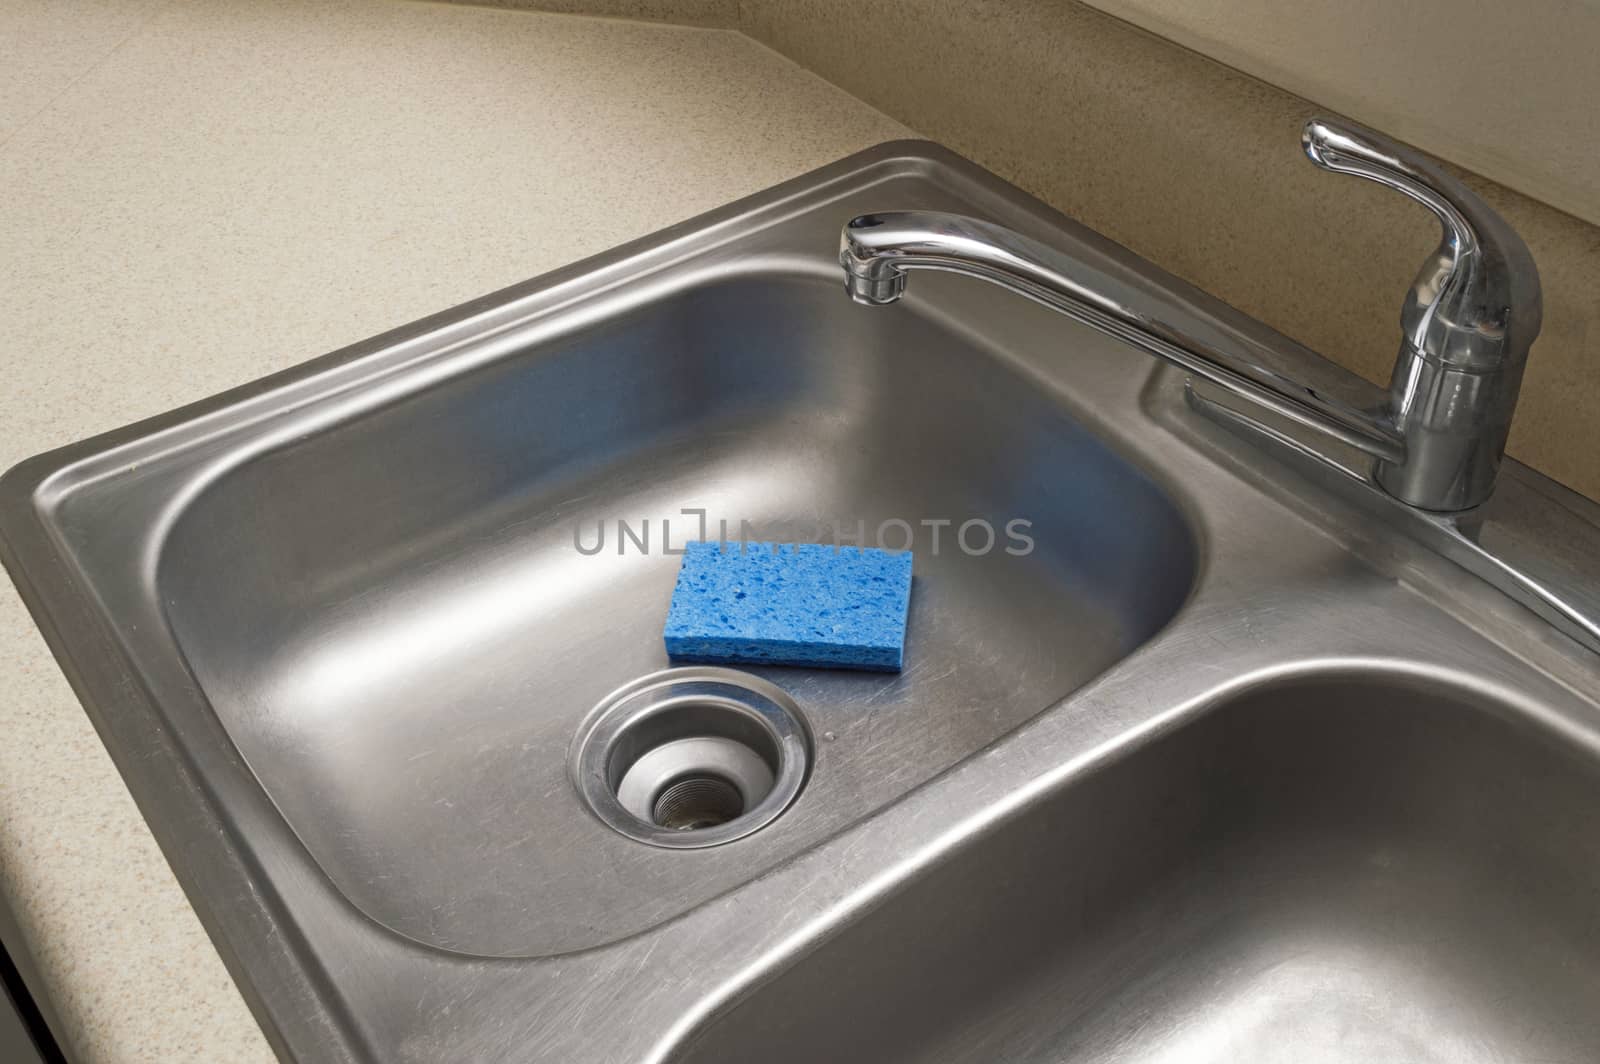 Empty stainless steel sink with blue sponge.